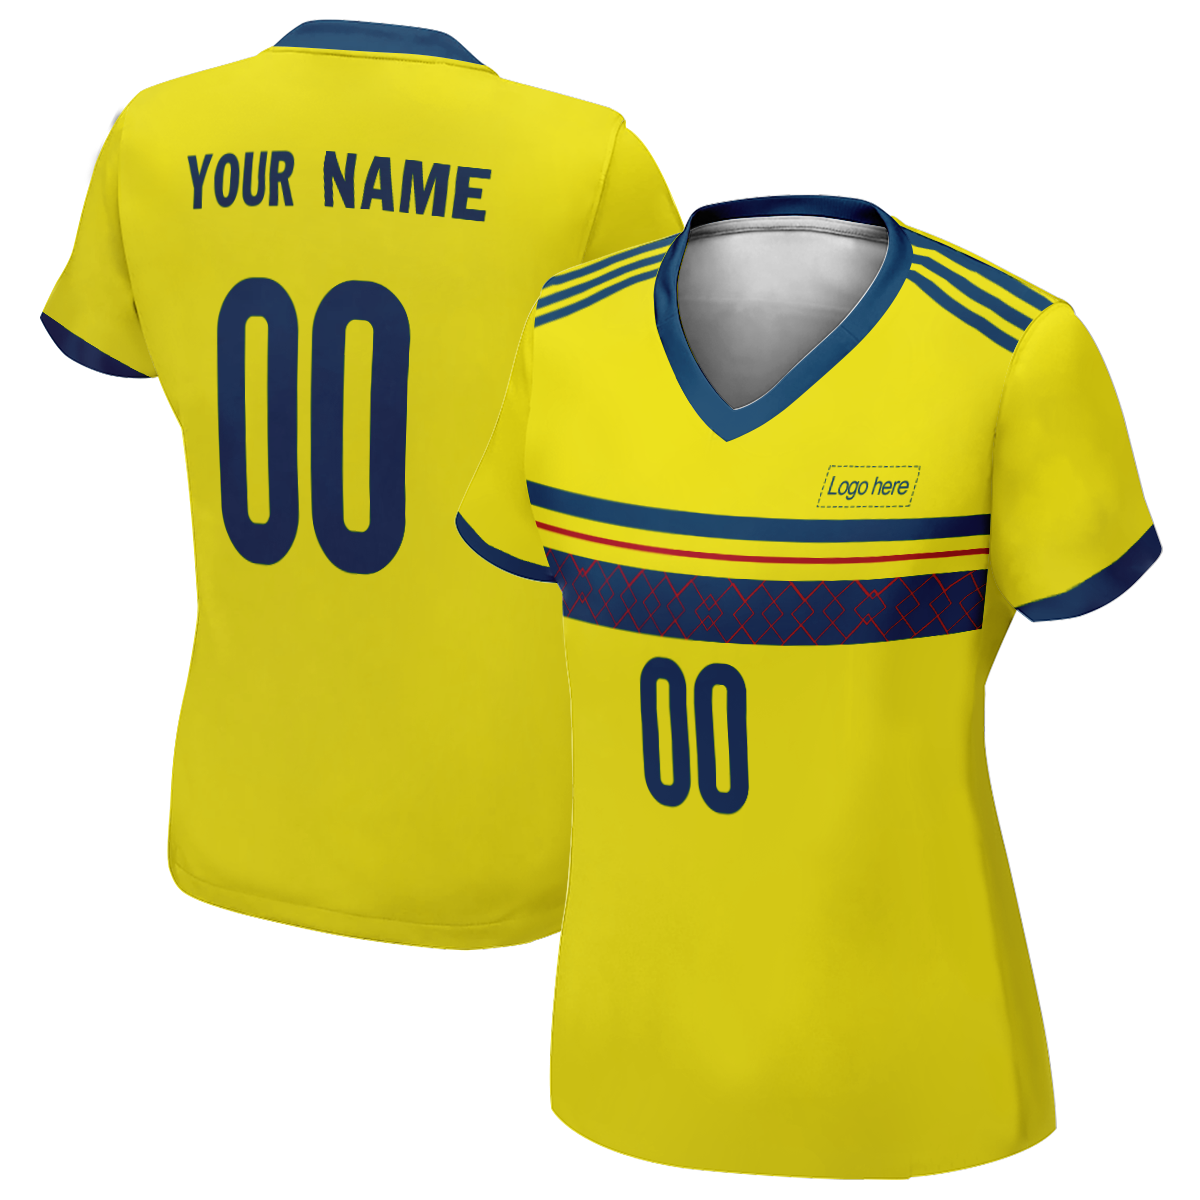 Women's Stitched Sweden World Cup Custom Soccer Jersey With Name